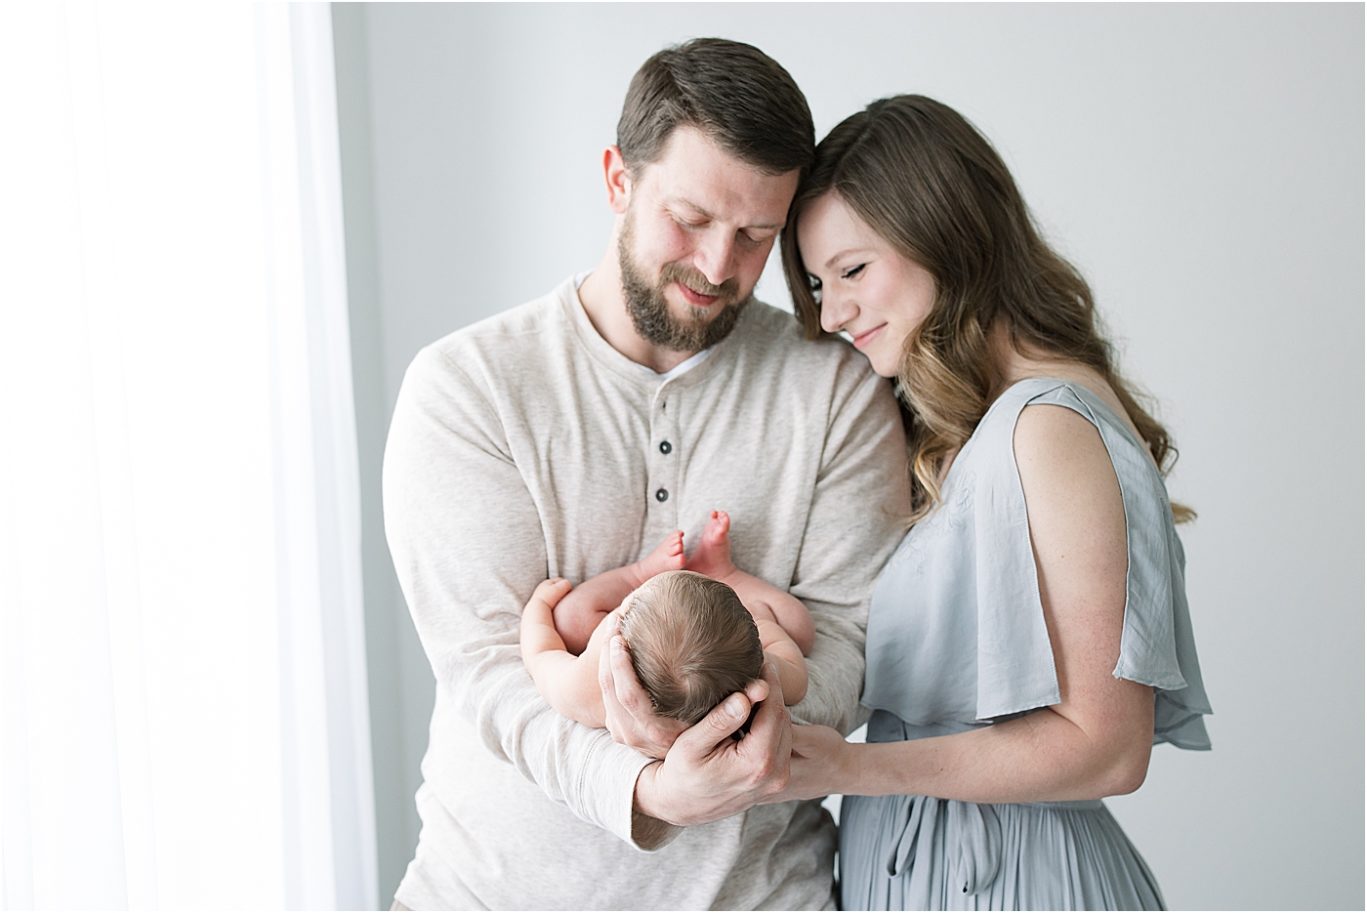 Family portrait during newborn session in studio in Fishers. Photo by Lindsay Konopa Photography.